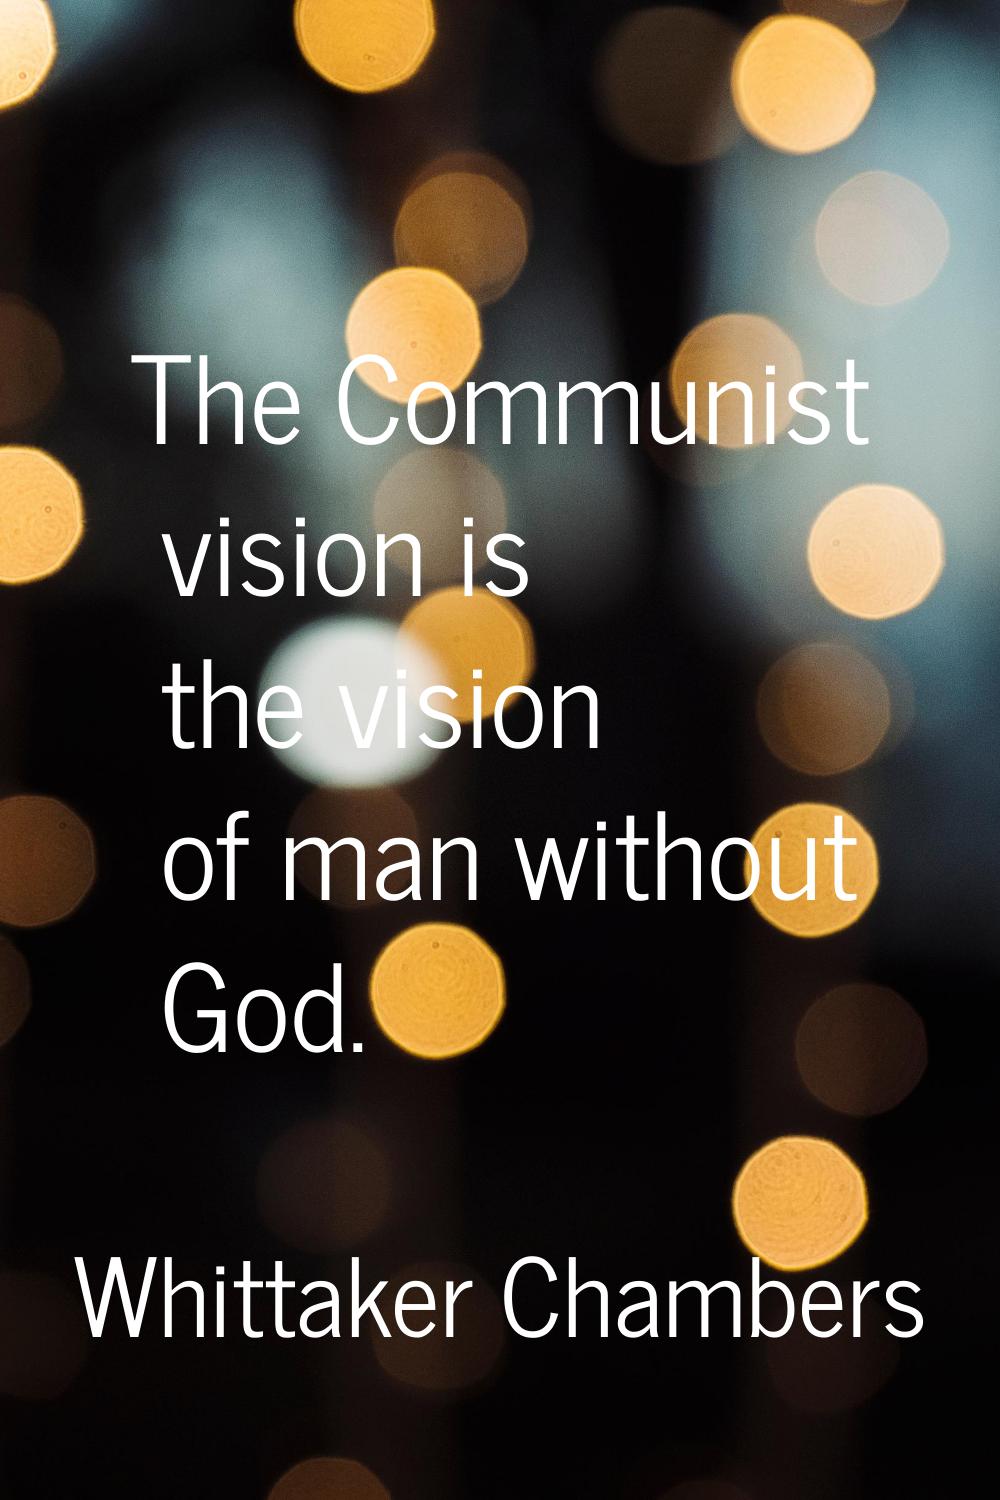 The Communist vision is the vision of man without God.